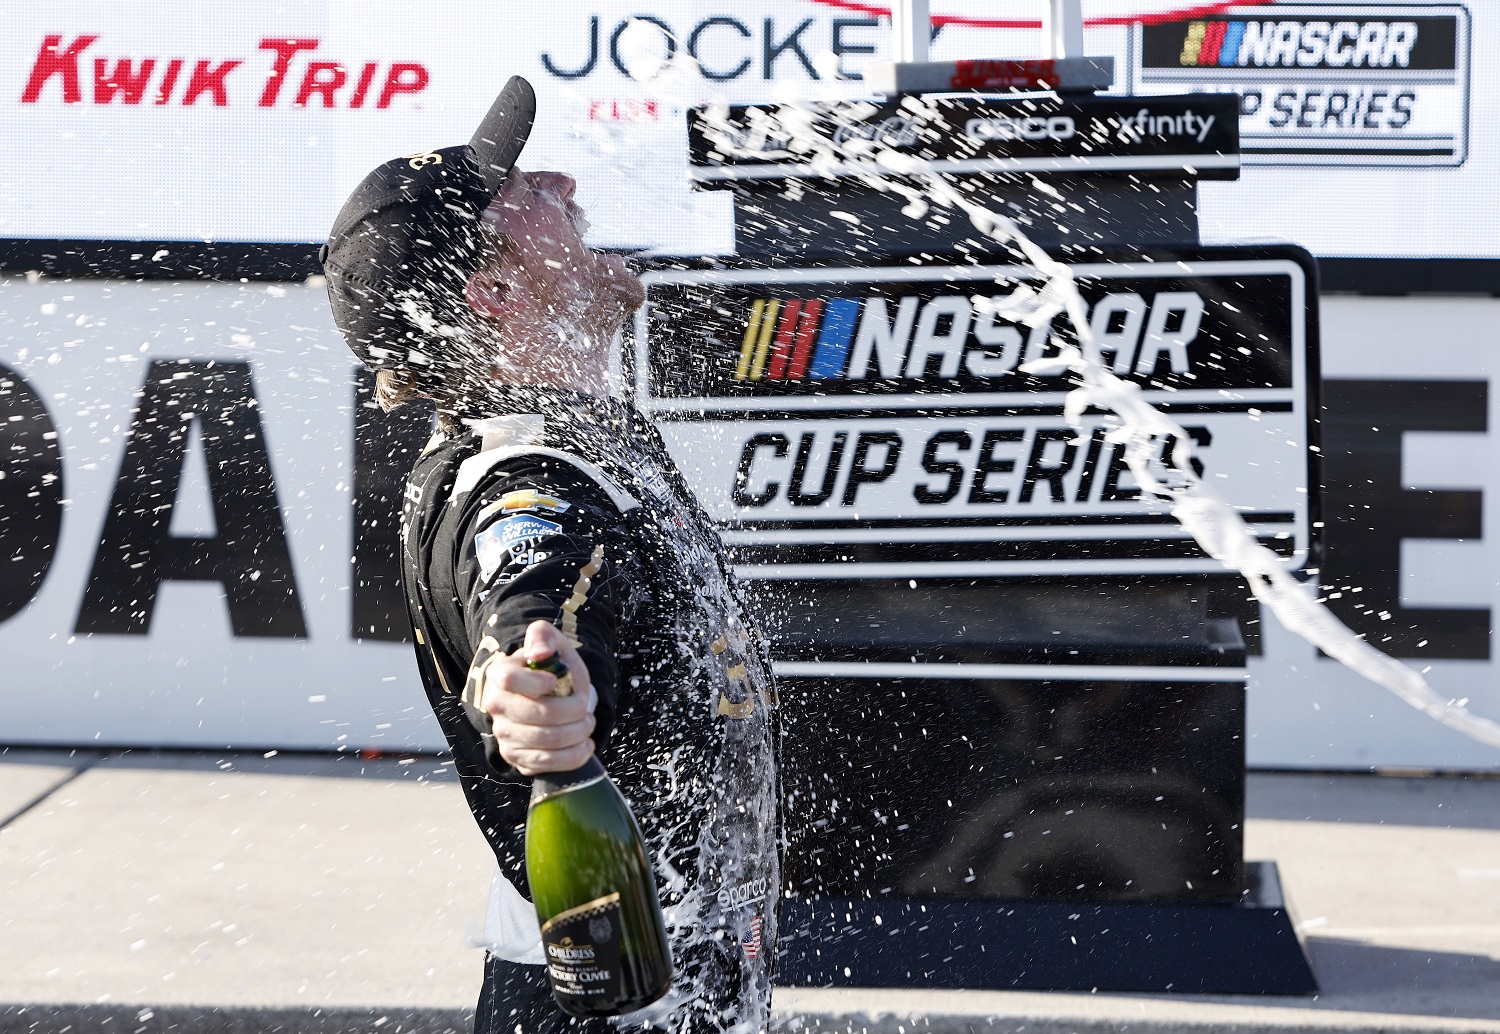 Tyler Reddick and crew celebrate by spraying champagne in Victory Lane after winning the NASCAR Cup Series Kwik Trip 250 at Road America on July 3, 2022.